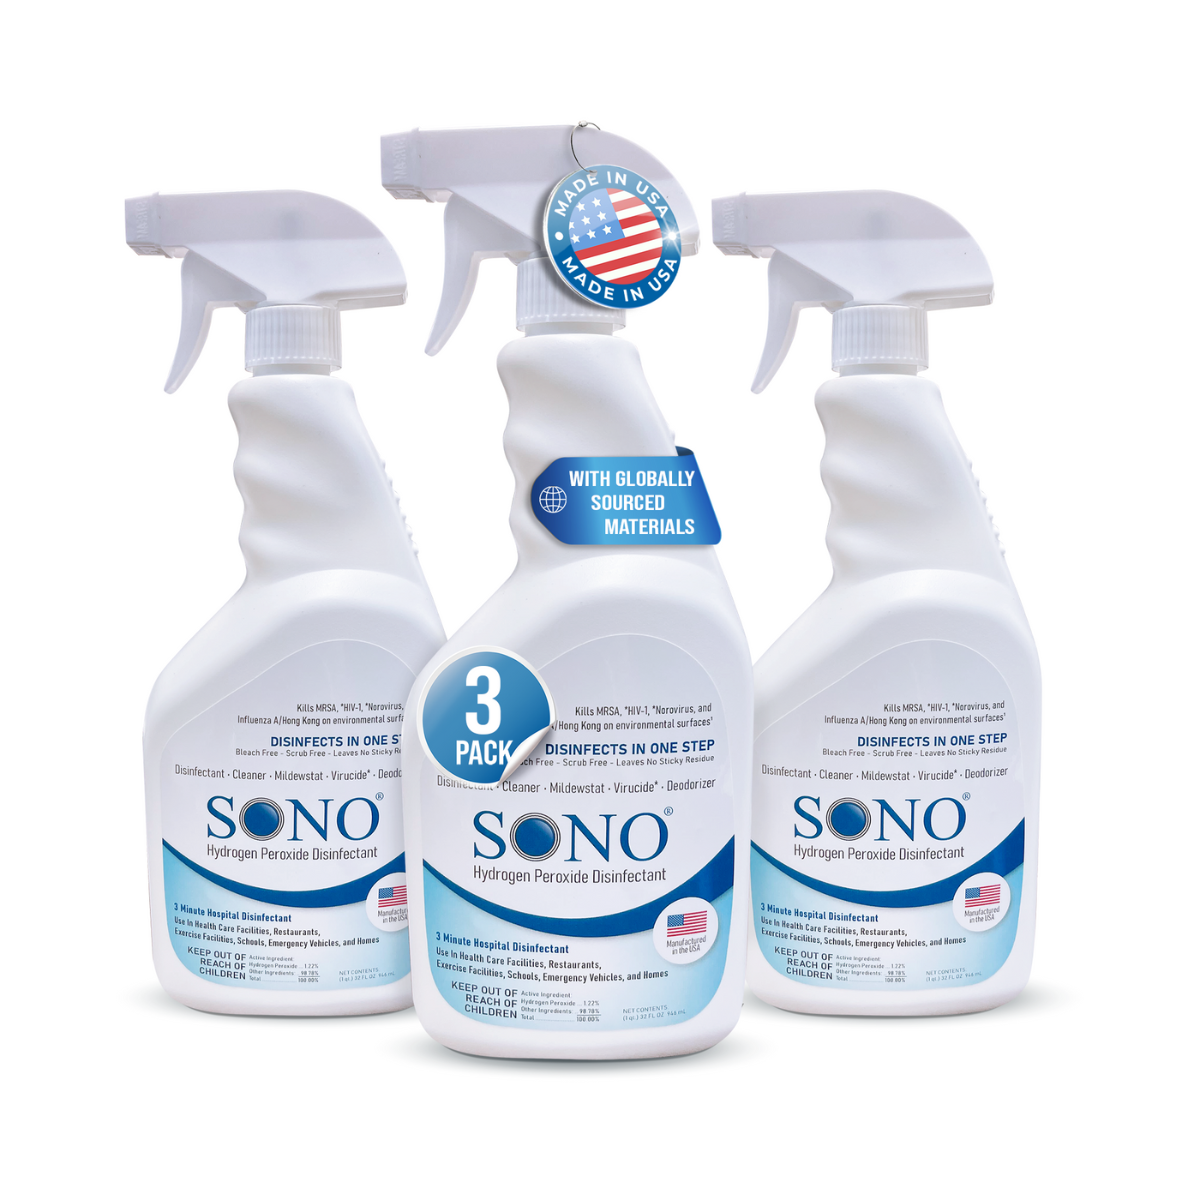 SONO Disinfecting Spray and Stain Remover (3 Pack): Medical Grade Cleaning Power